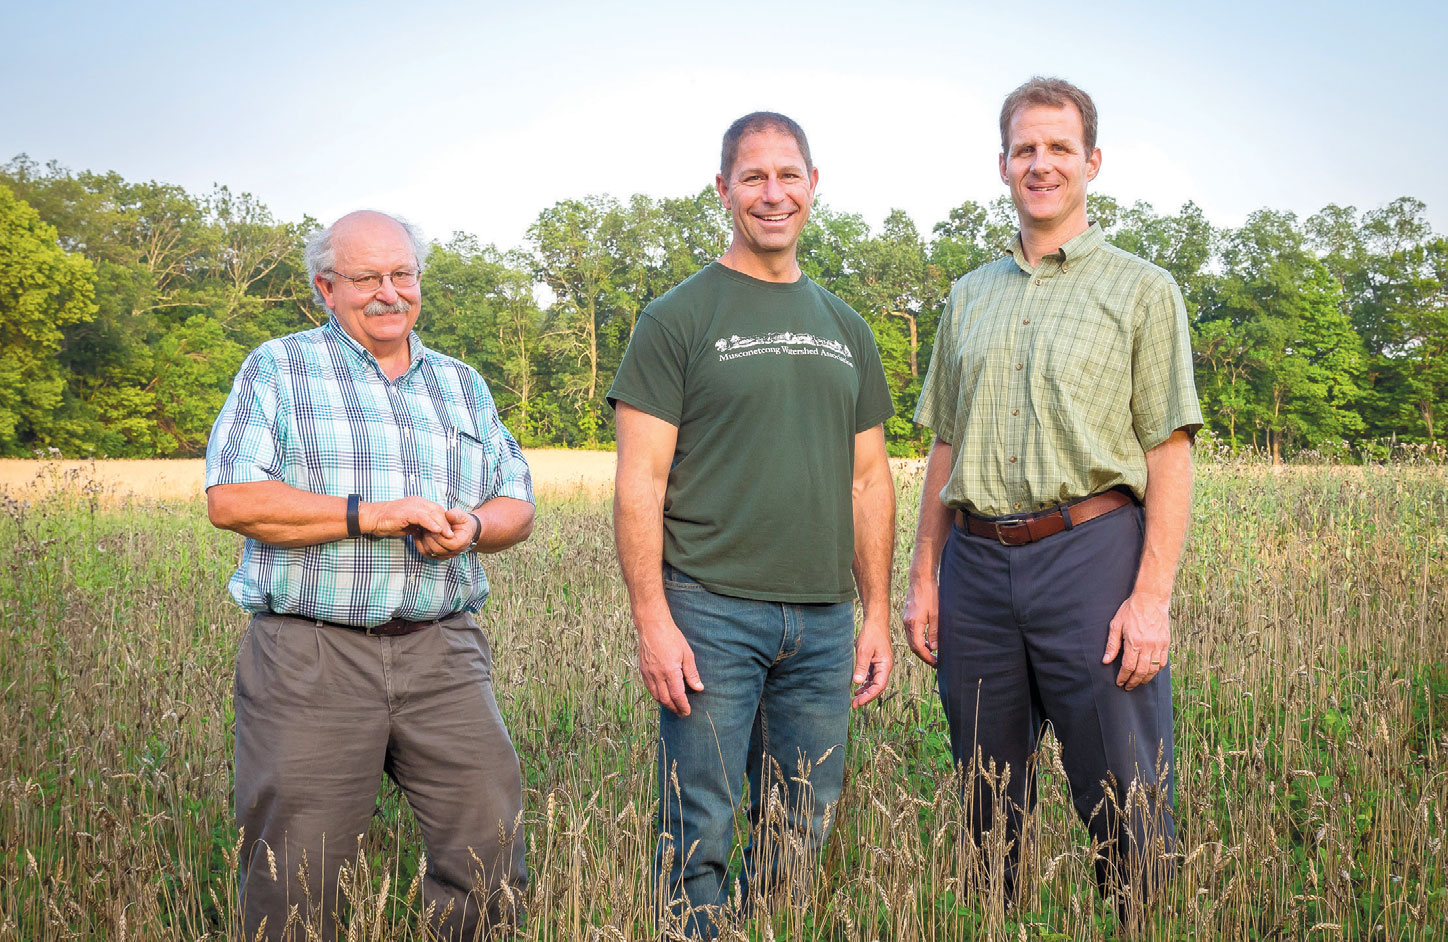 Farmer Kent Kimball (left), of Kimball’s Farm in Belvidere, with Mike Hozer and Leonard Bussanich.